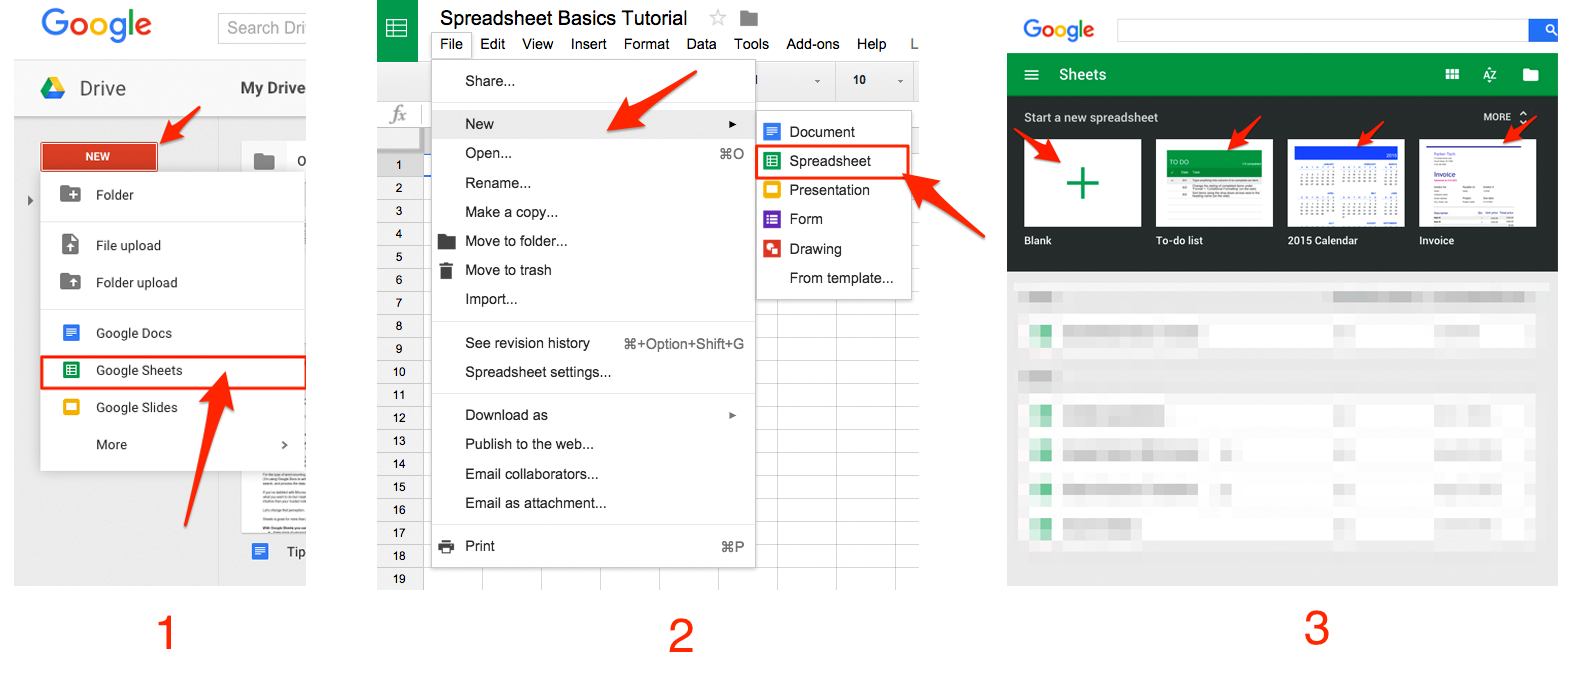 G Spreadsheet Within Google Sheets 101: The Beginner's Guide To Online Spreadsheets  The